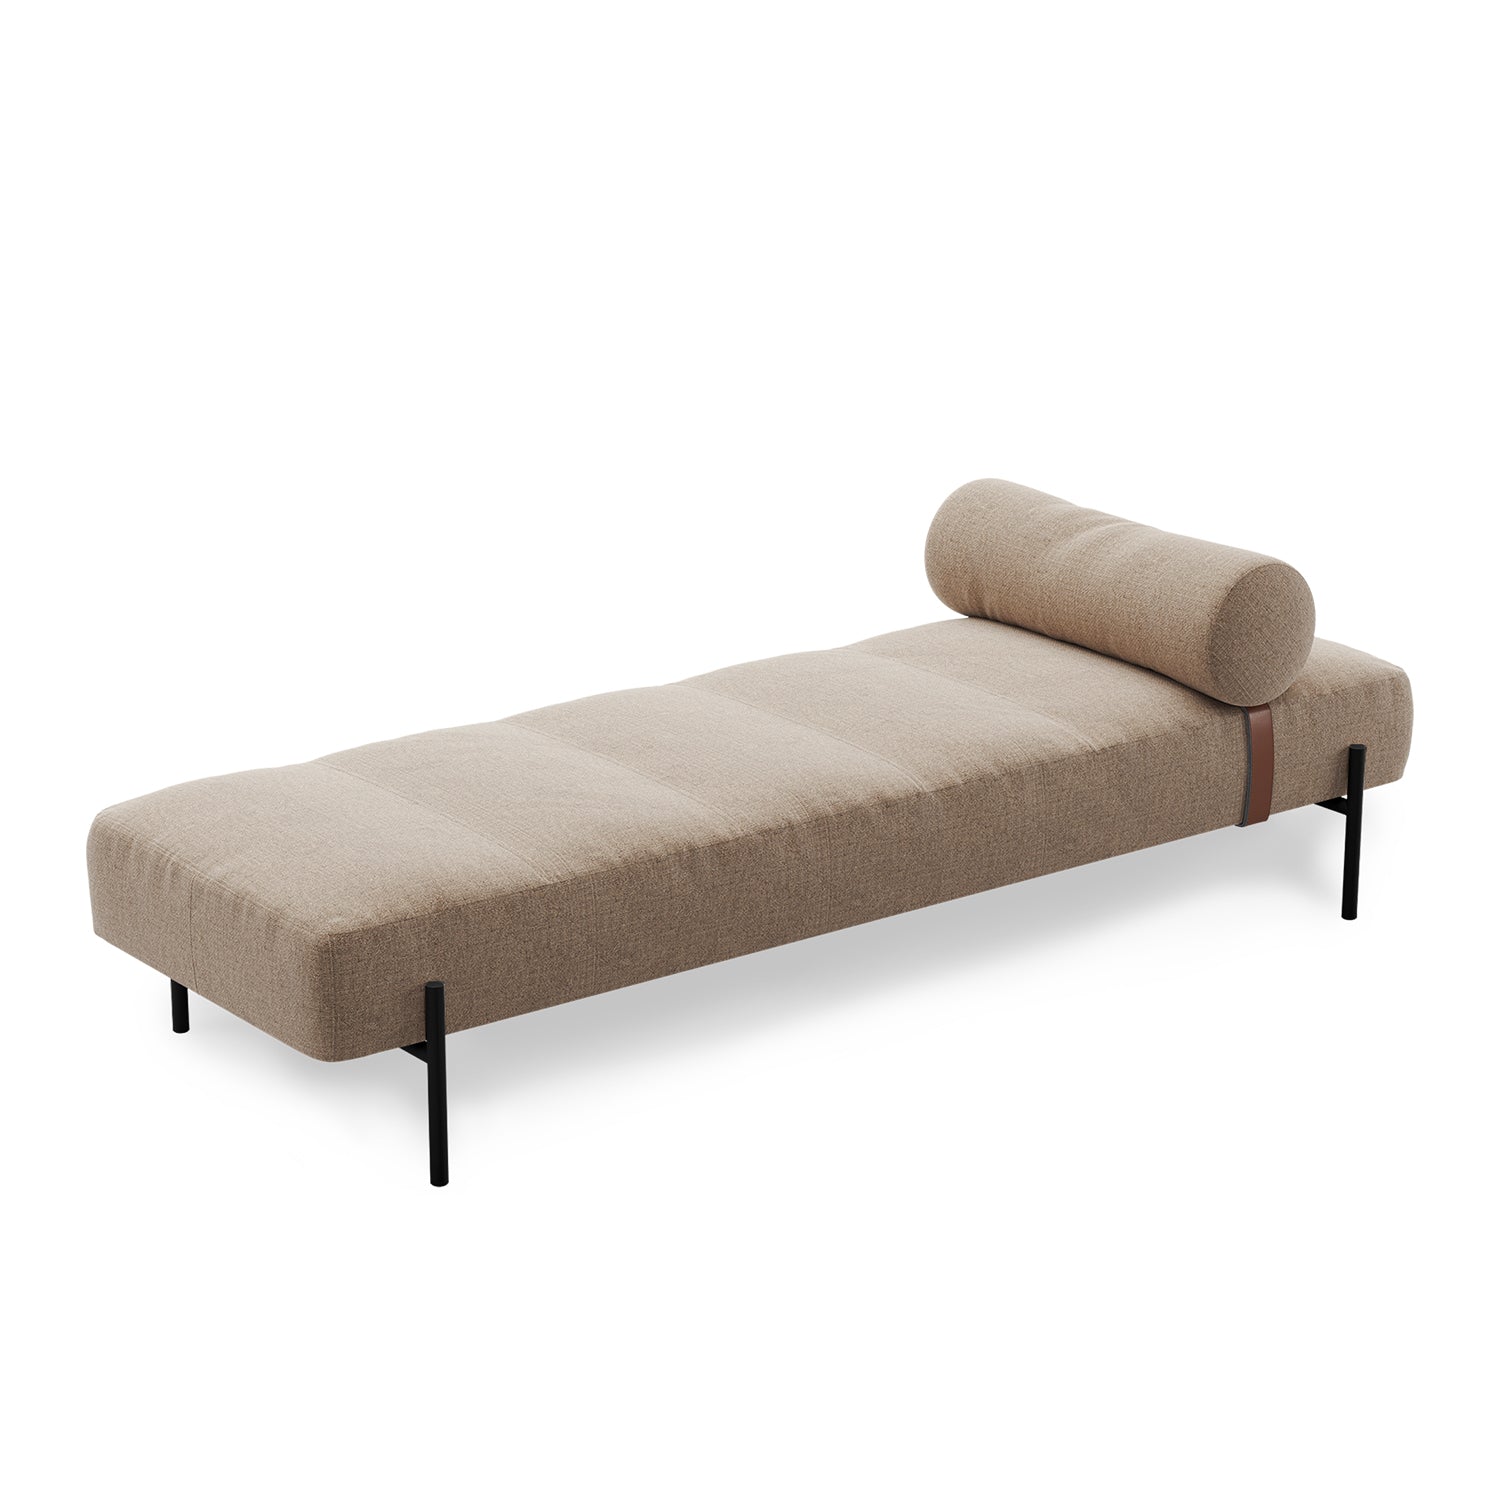 Northern Daybe Daybed in brusvik 65 and Black legs